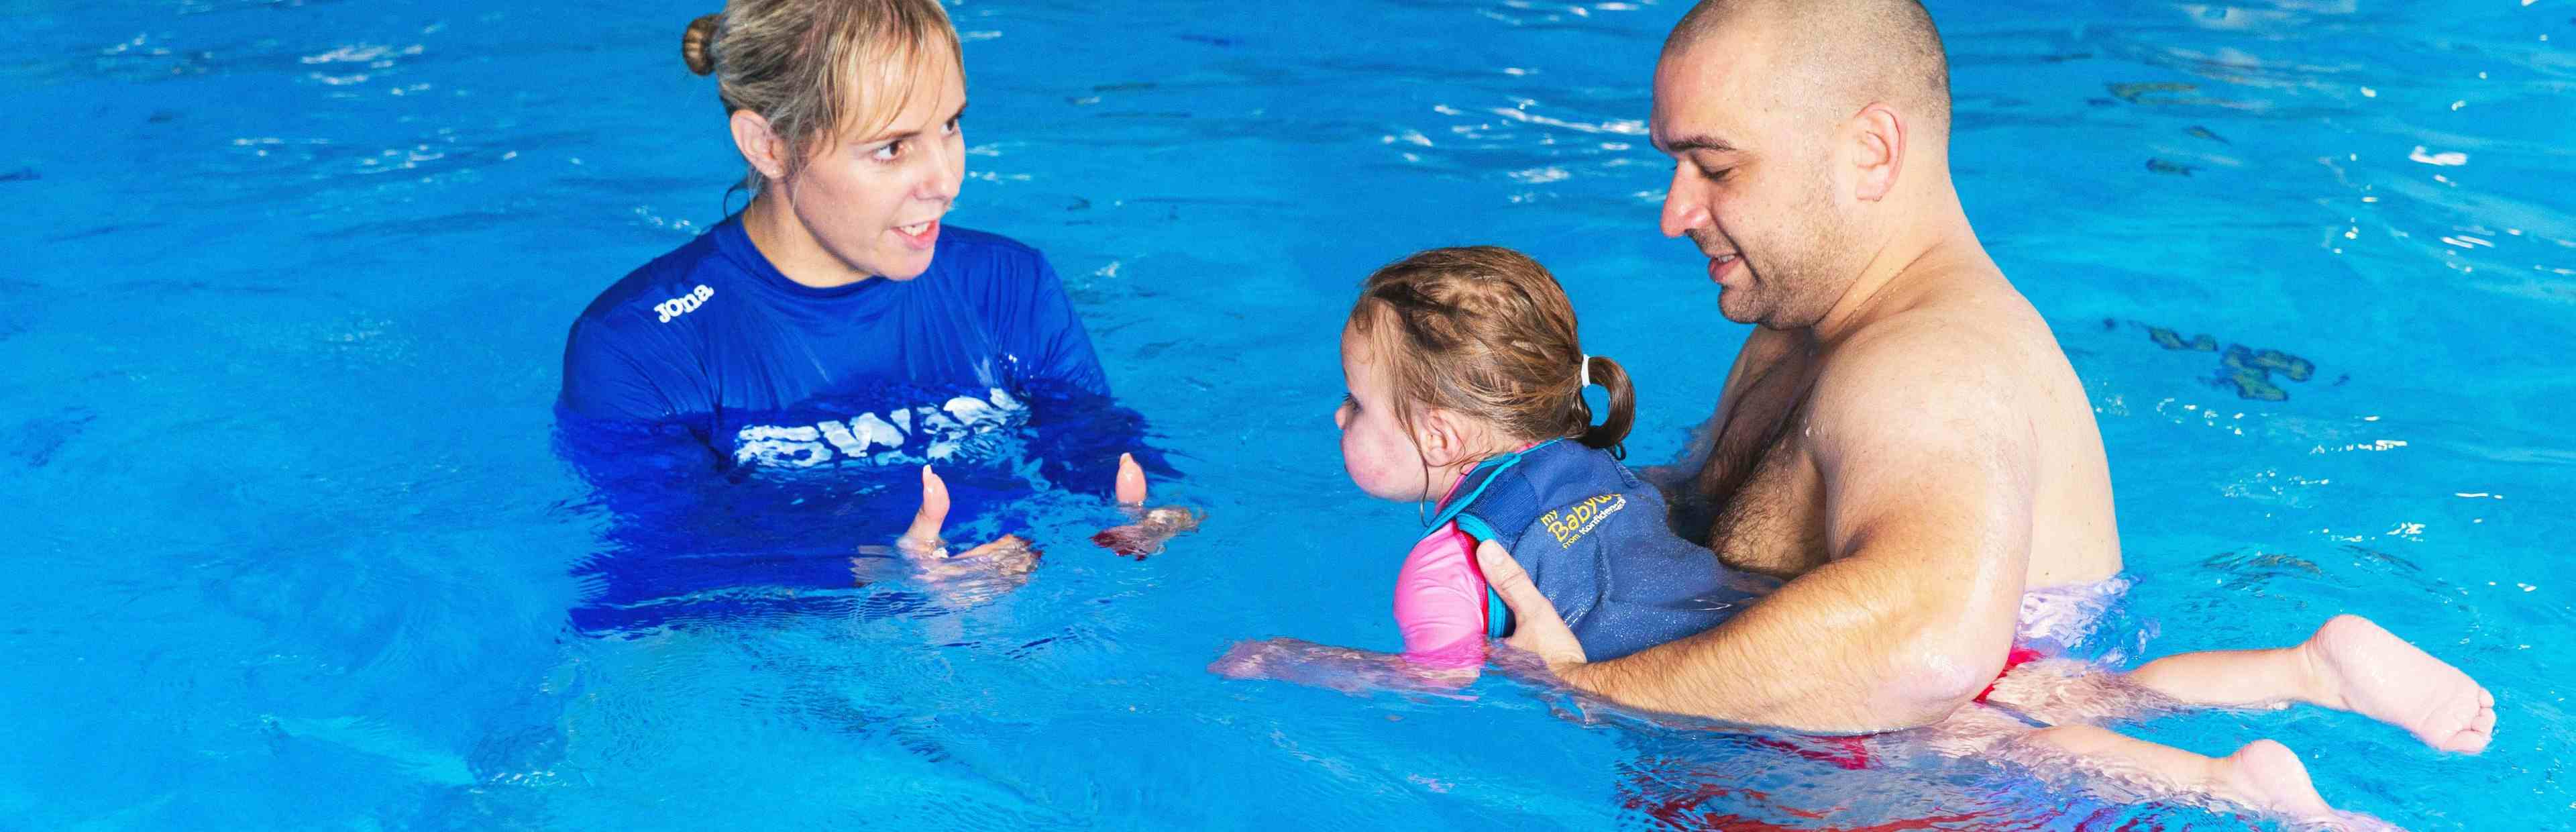 Father supporting child in swimming pool